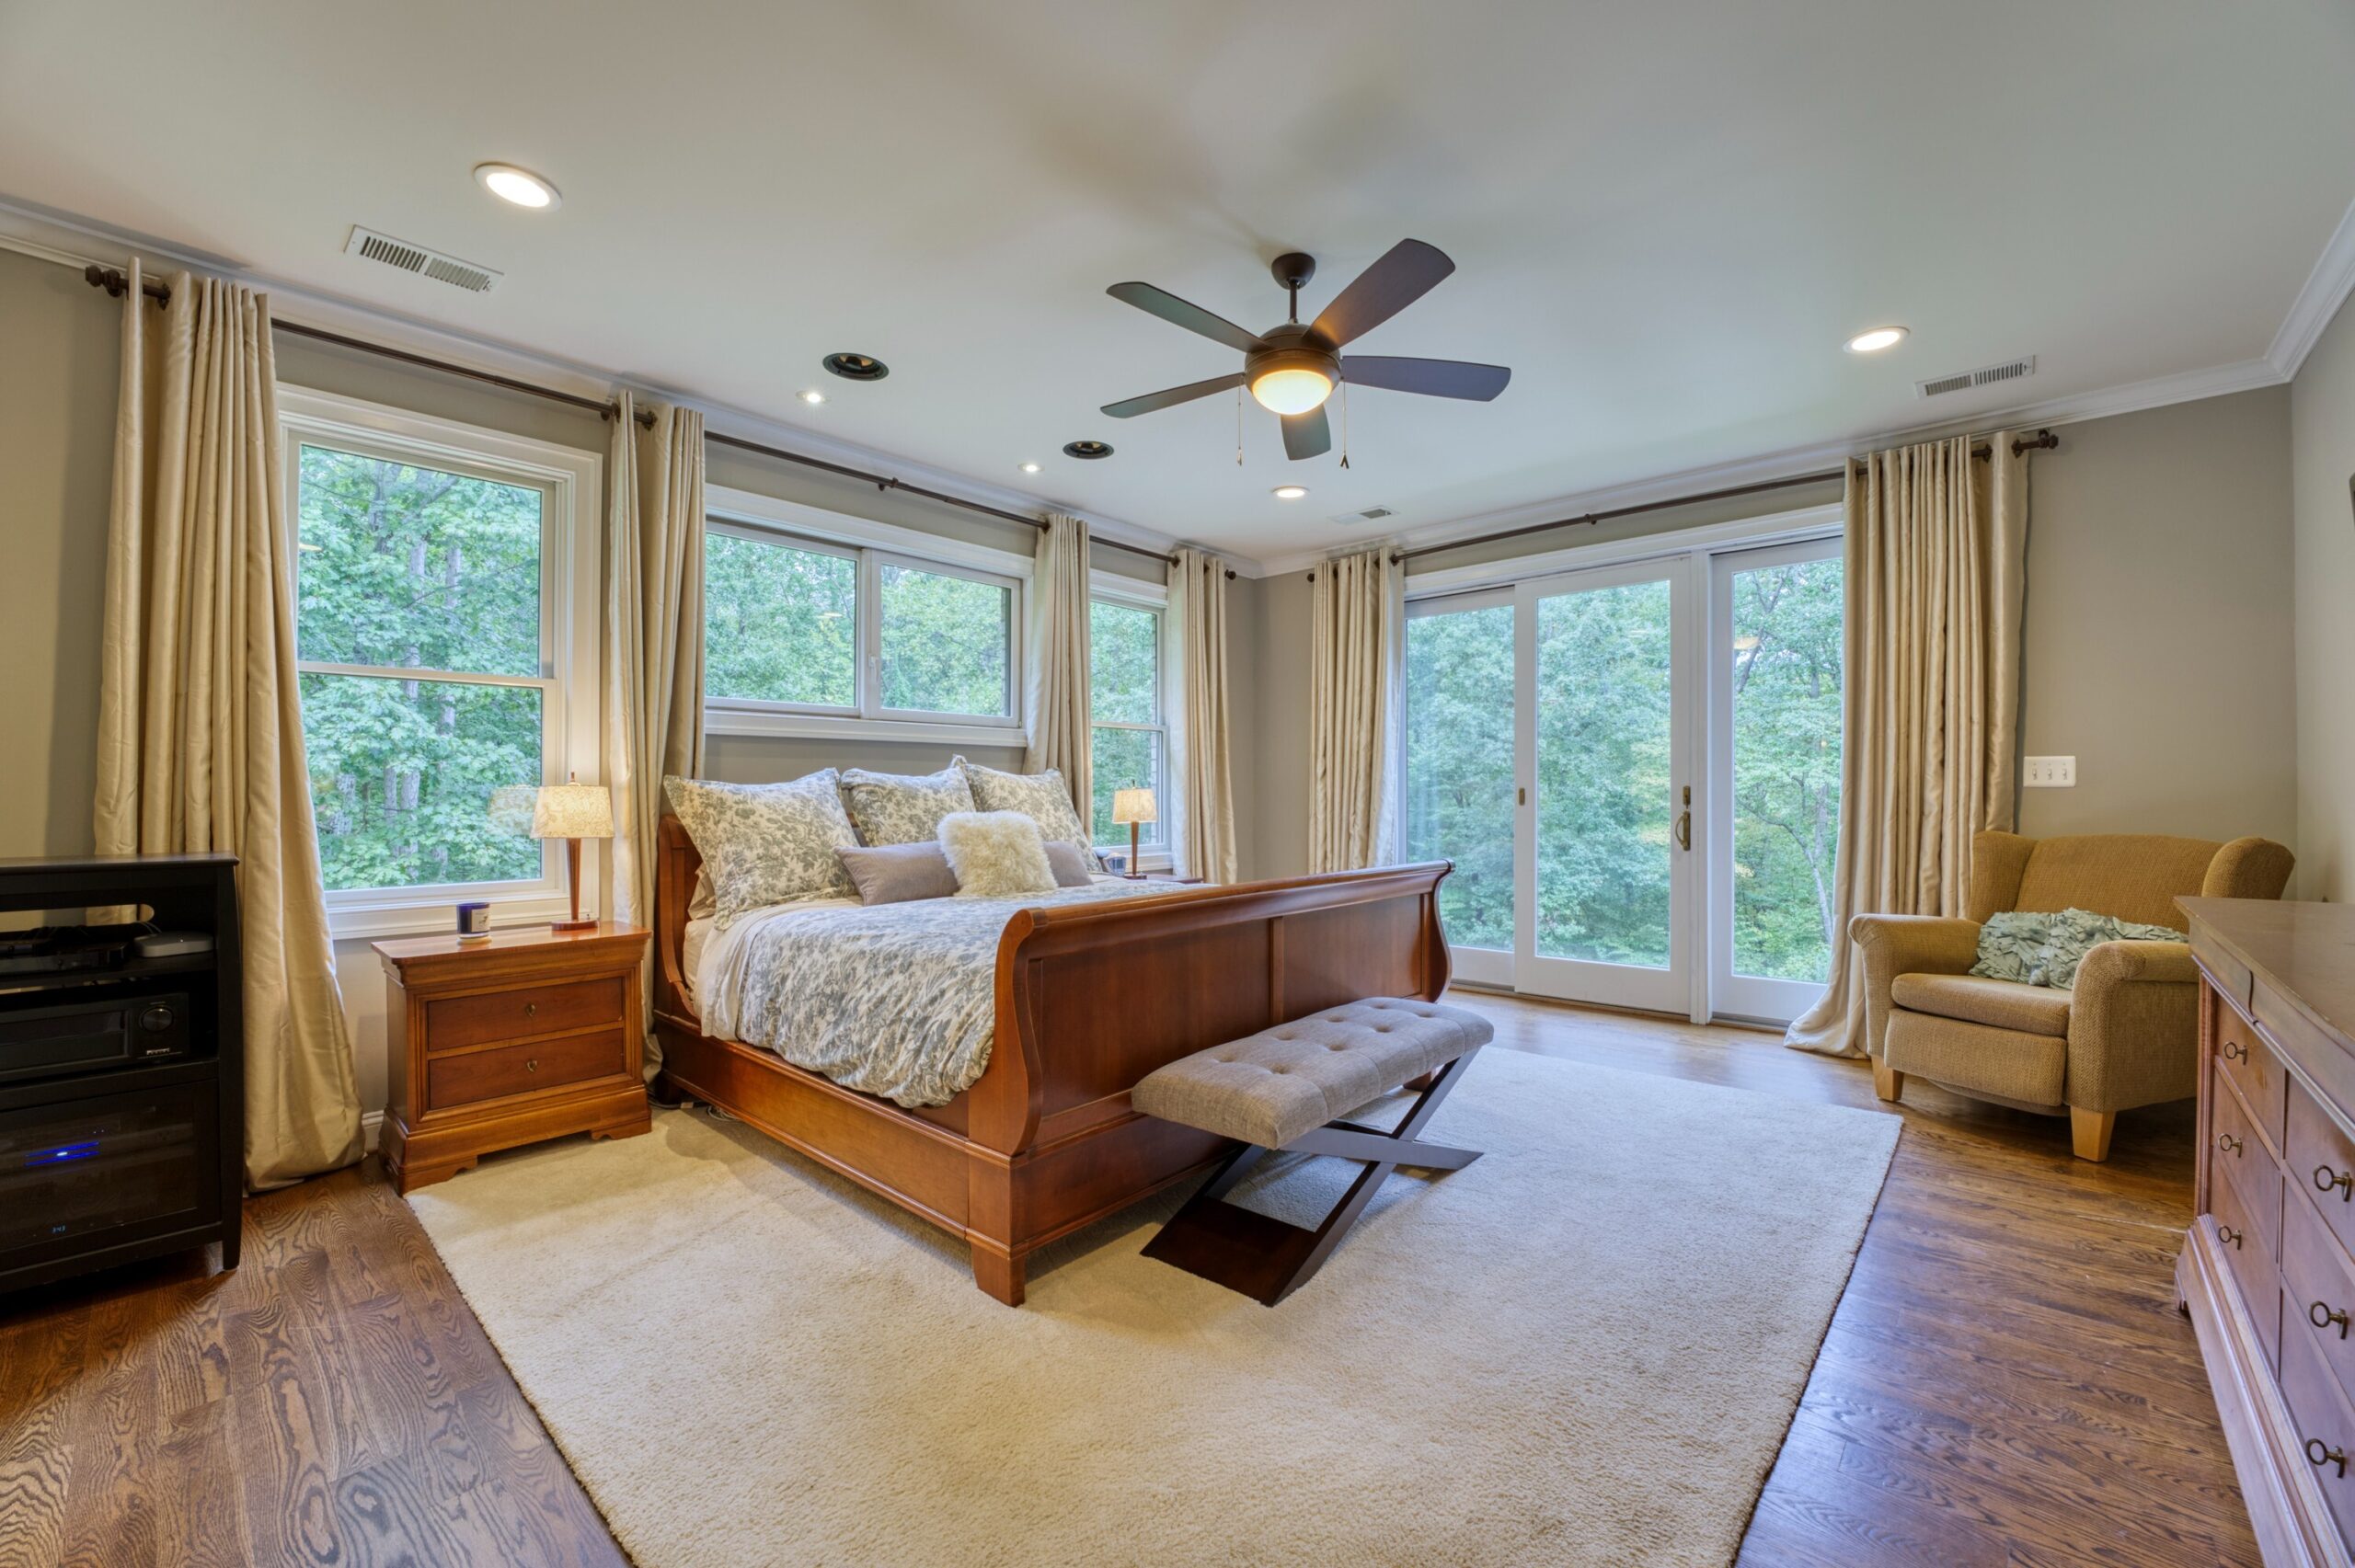 Professional interior photo of 40046 Mount Gilead Rd in Leesburg, Virginia - showing the main floor primary bedroom with huge windows on two walls, hardwood floors, and views of the woods